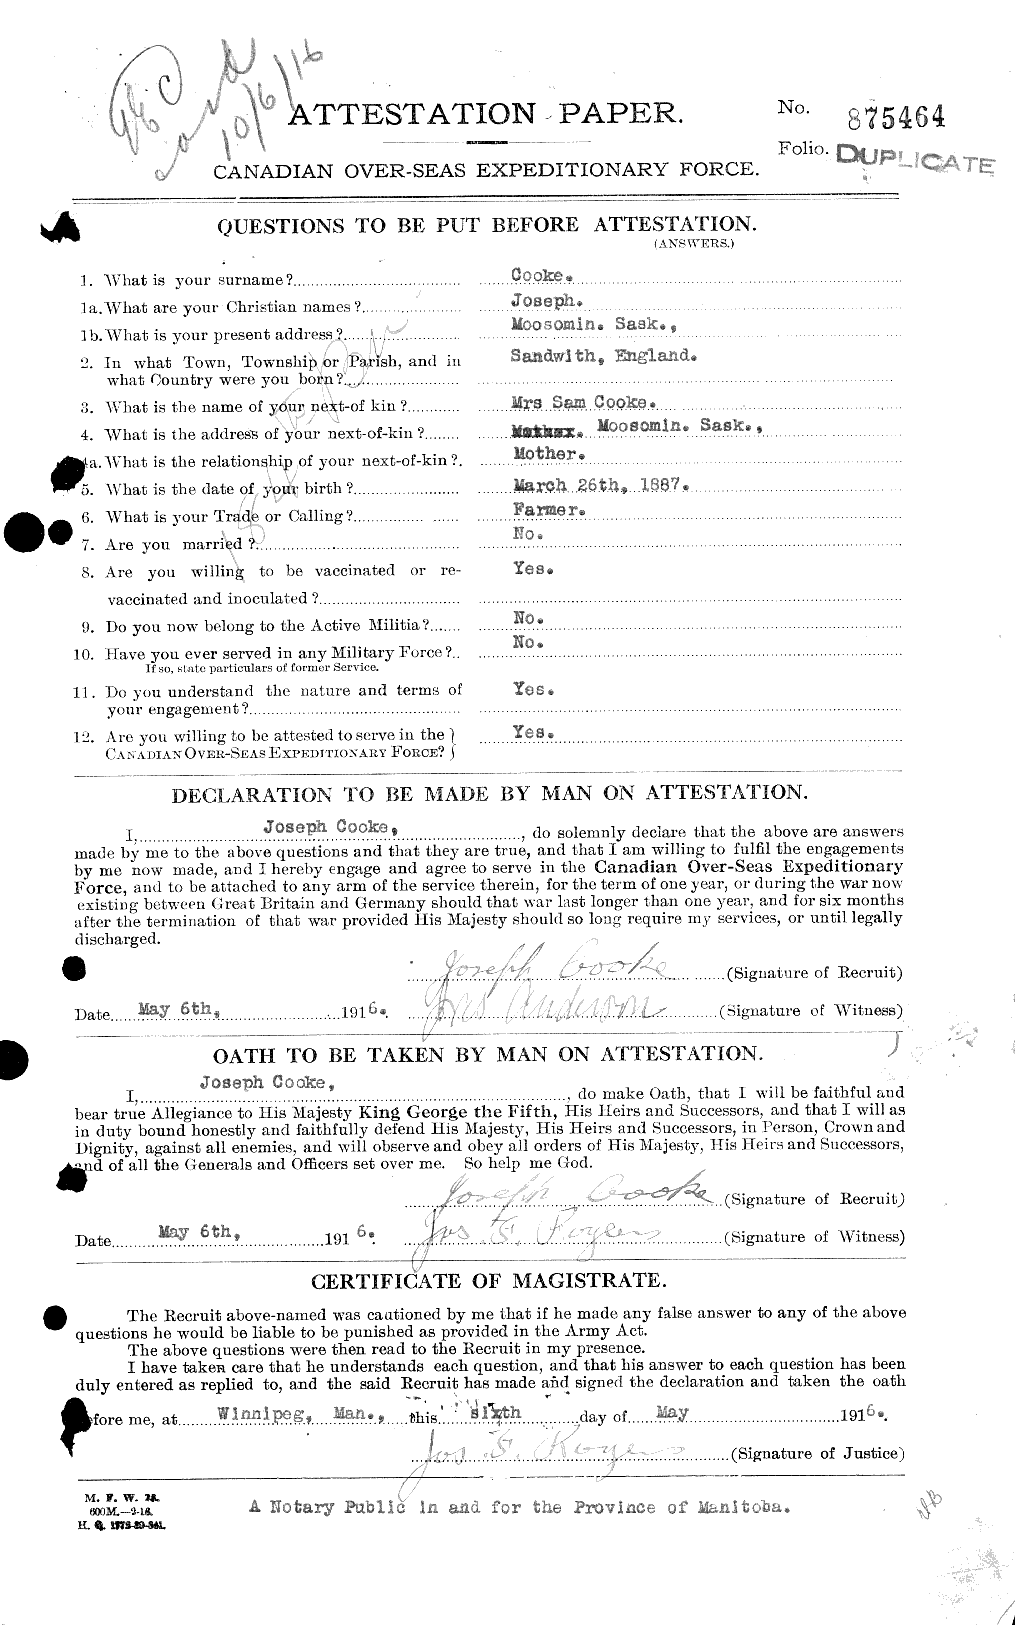 Personnel Records of the First World War - CEF 048928a